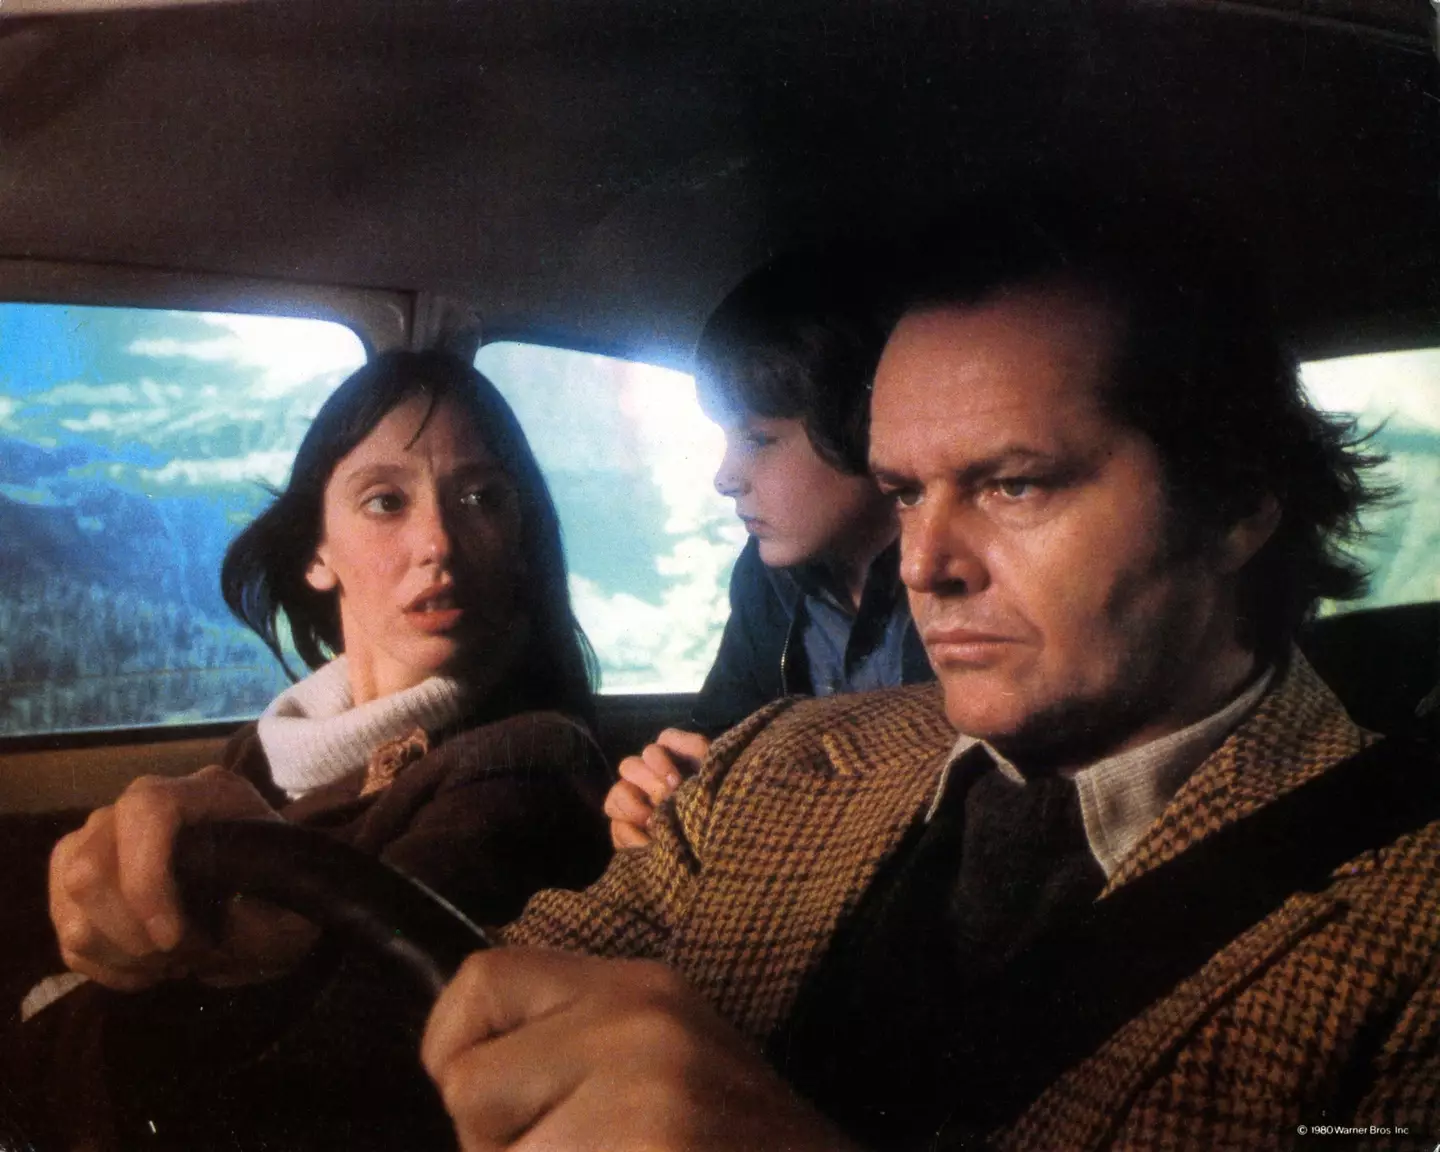 Shelly Duvall and Jack Nicholson in The Shining. (Warner Brothers/Getty Images)